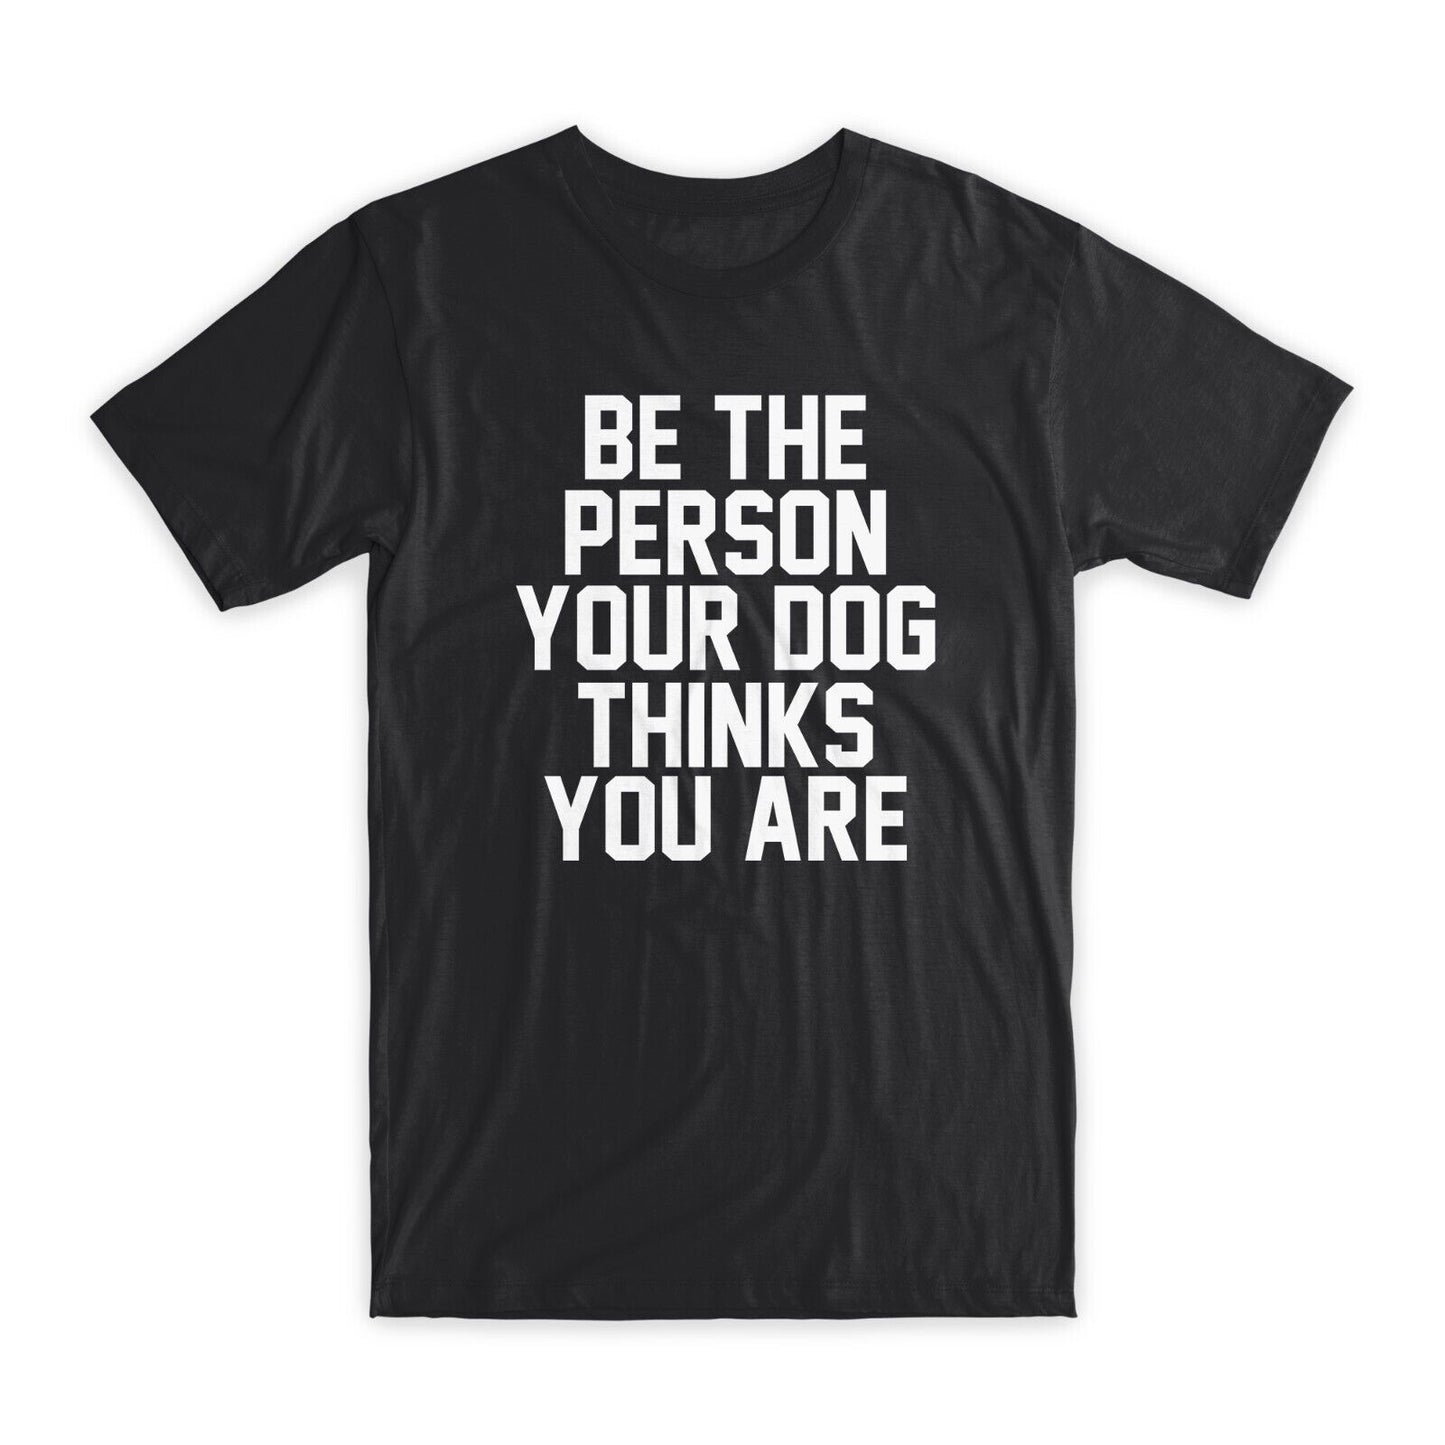 Be The Person Your Dog Thinks You Are T-Shirt Premium Cotton Funny Tees Gift NEW